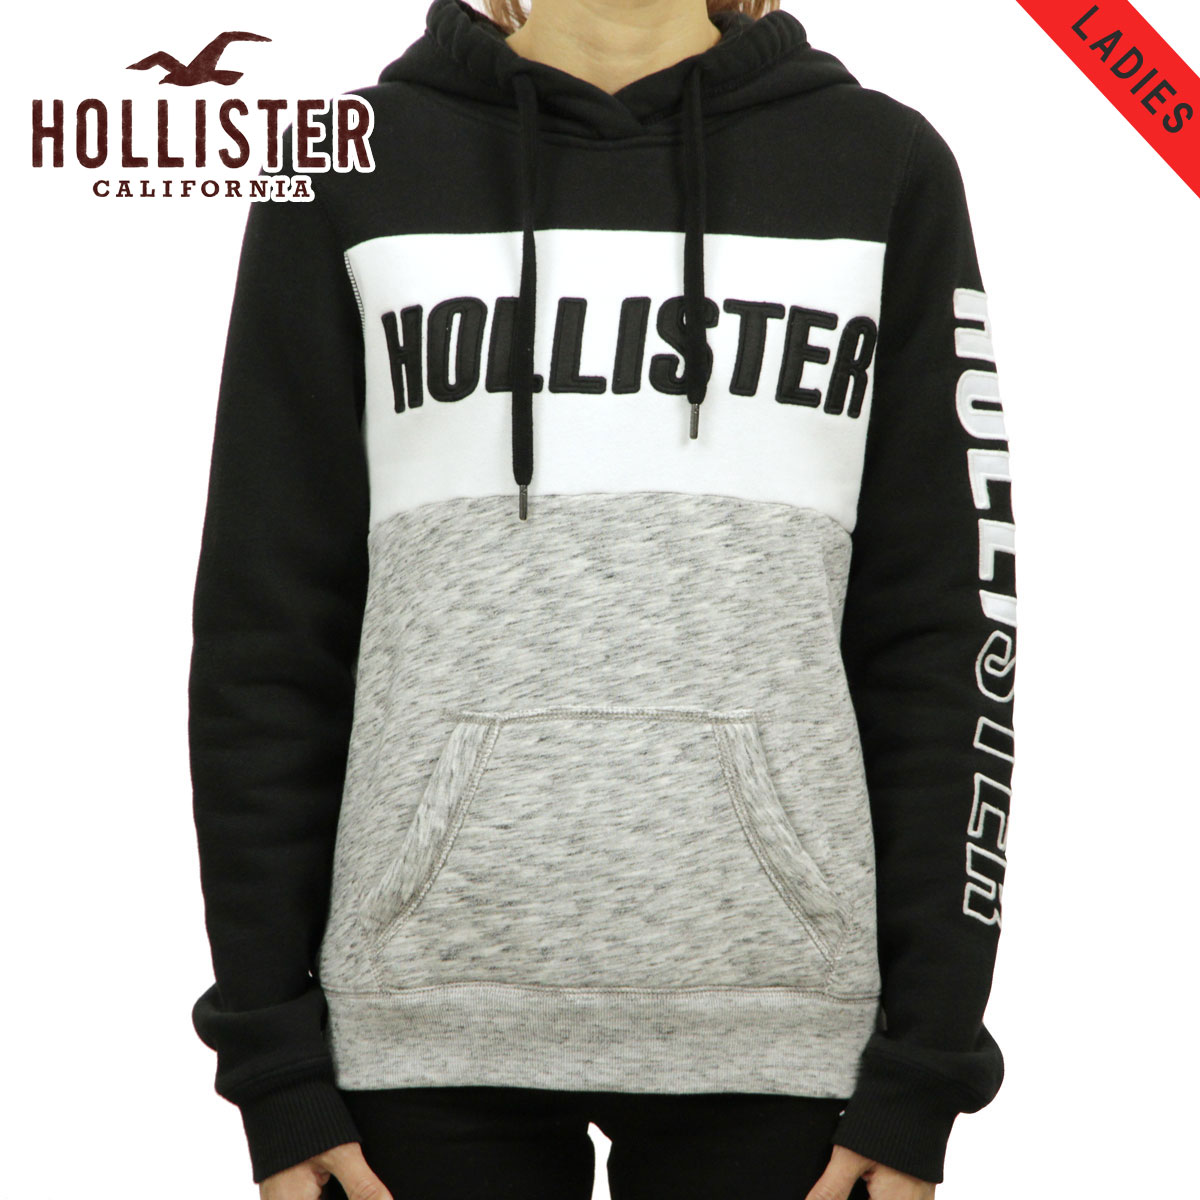 5%OFFZ[  ̔ 8/2 20:00`8/9 01:59  zX^[ p[J[ fB[X Ki HOLLISTER vI[o[p[J[ S Logo Graphic Hoodie 352-524-0370-908